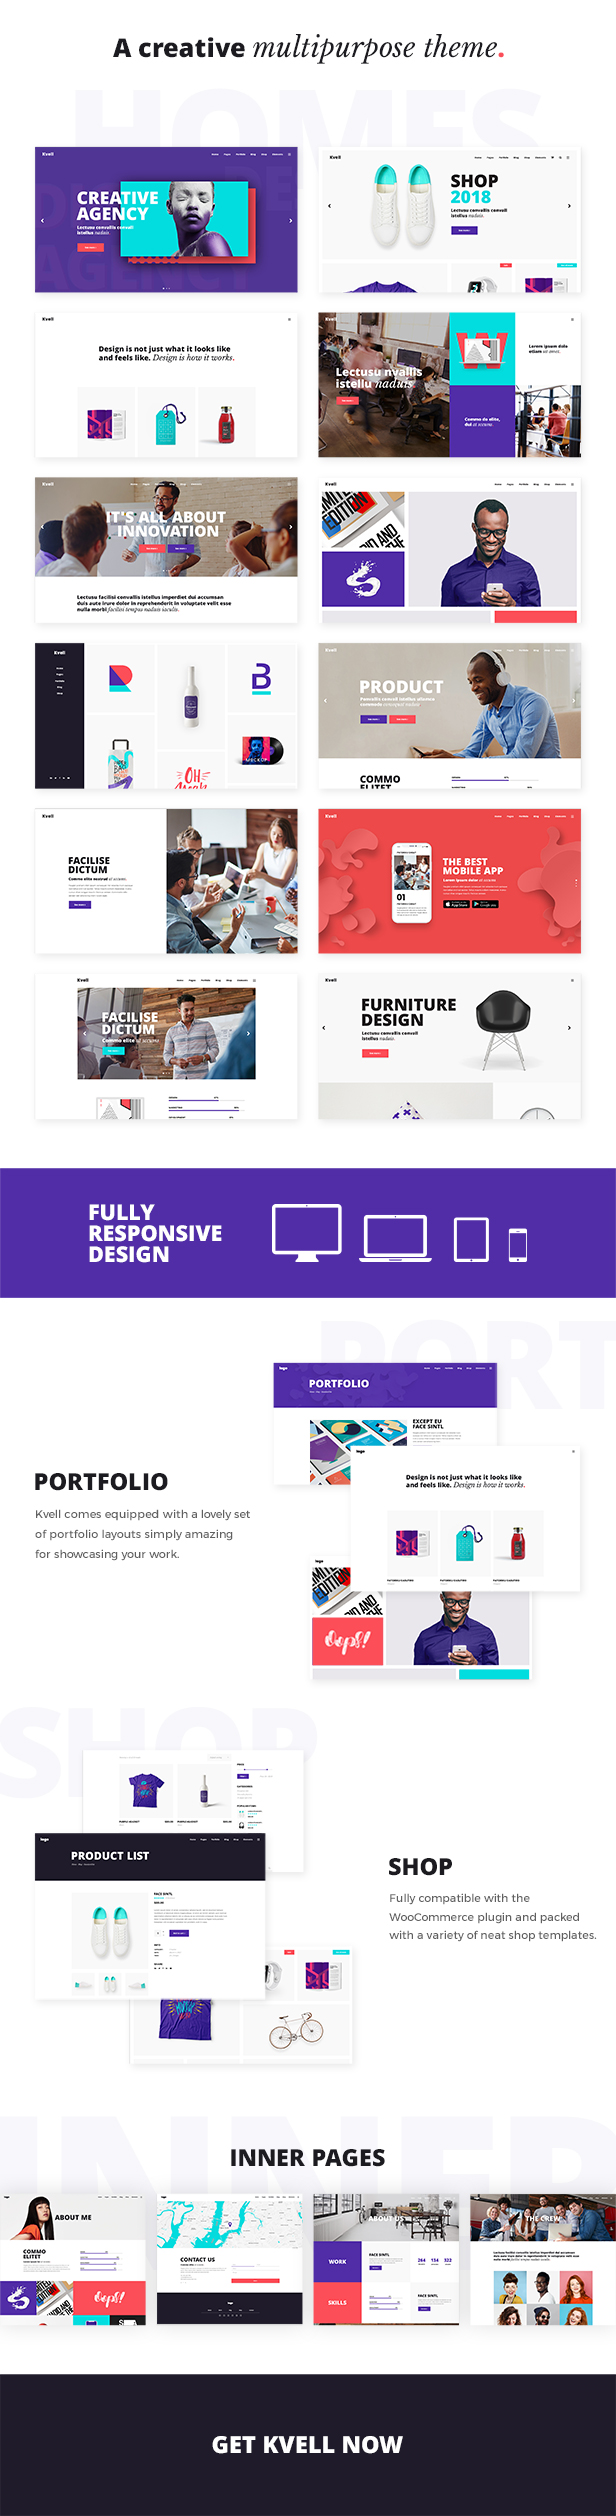 WordPress theme Kvell - A Creative Multipurpose Theme for Freelancers and Agencies (Creative)